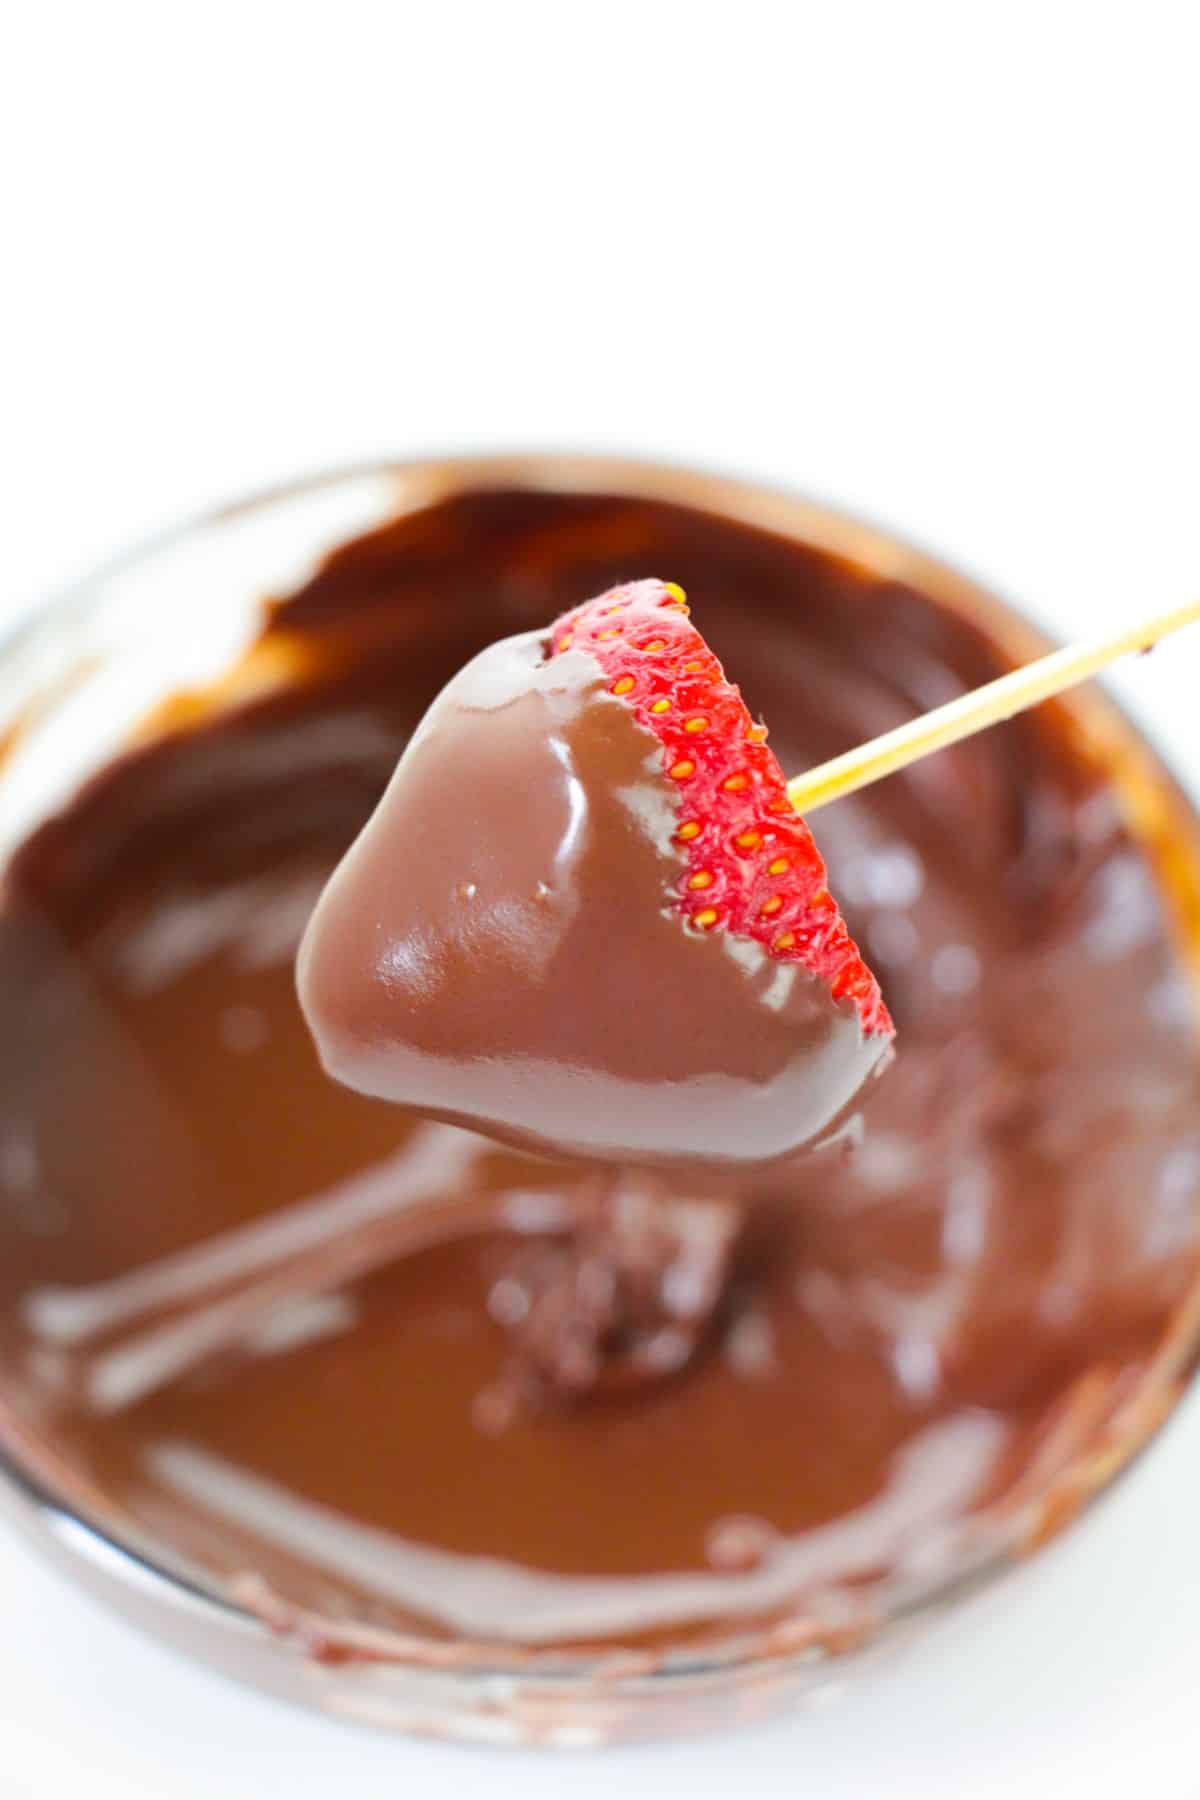 The strawberry is dipped in melted chocolate.